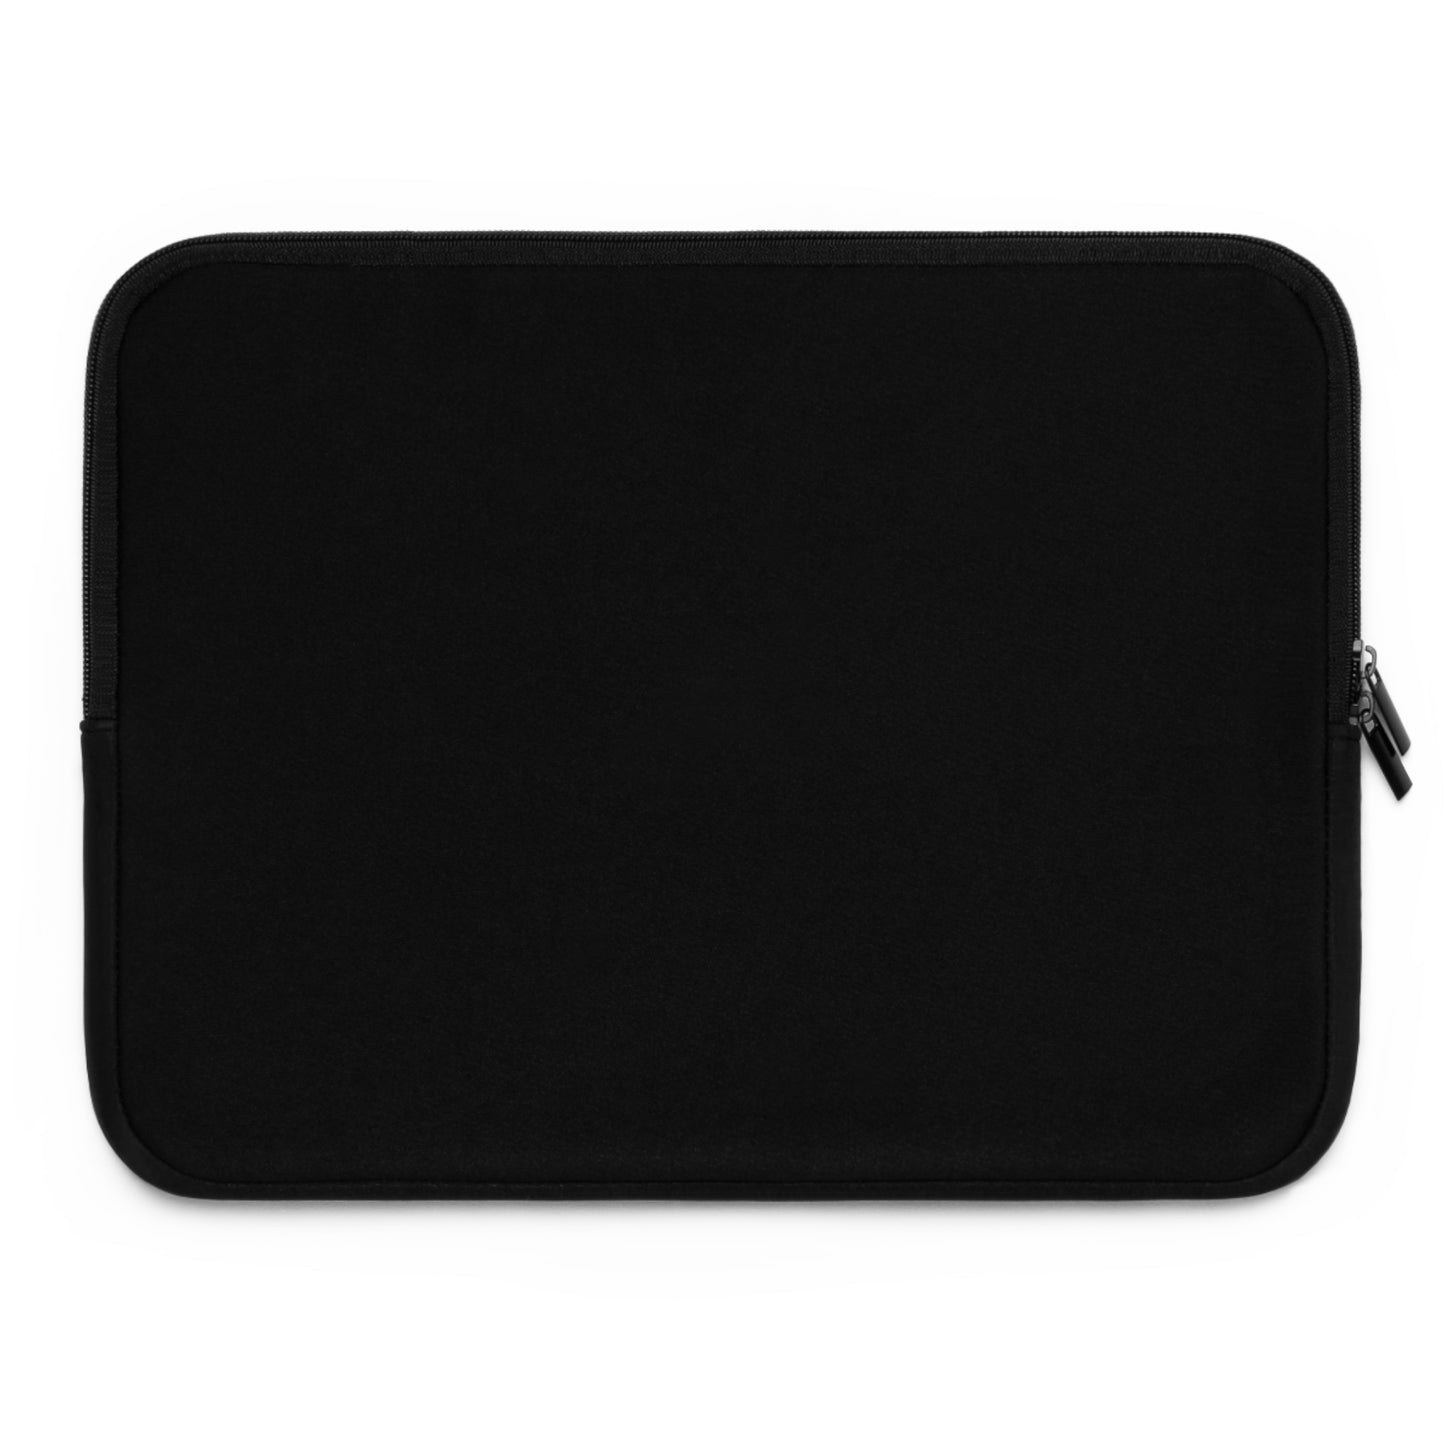 Sistar You Are Loved Laptop Sleeve